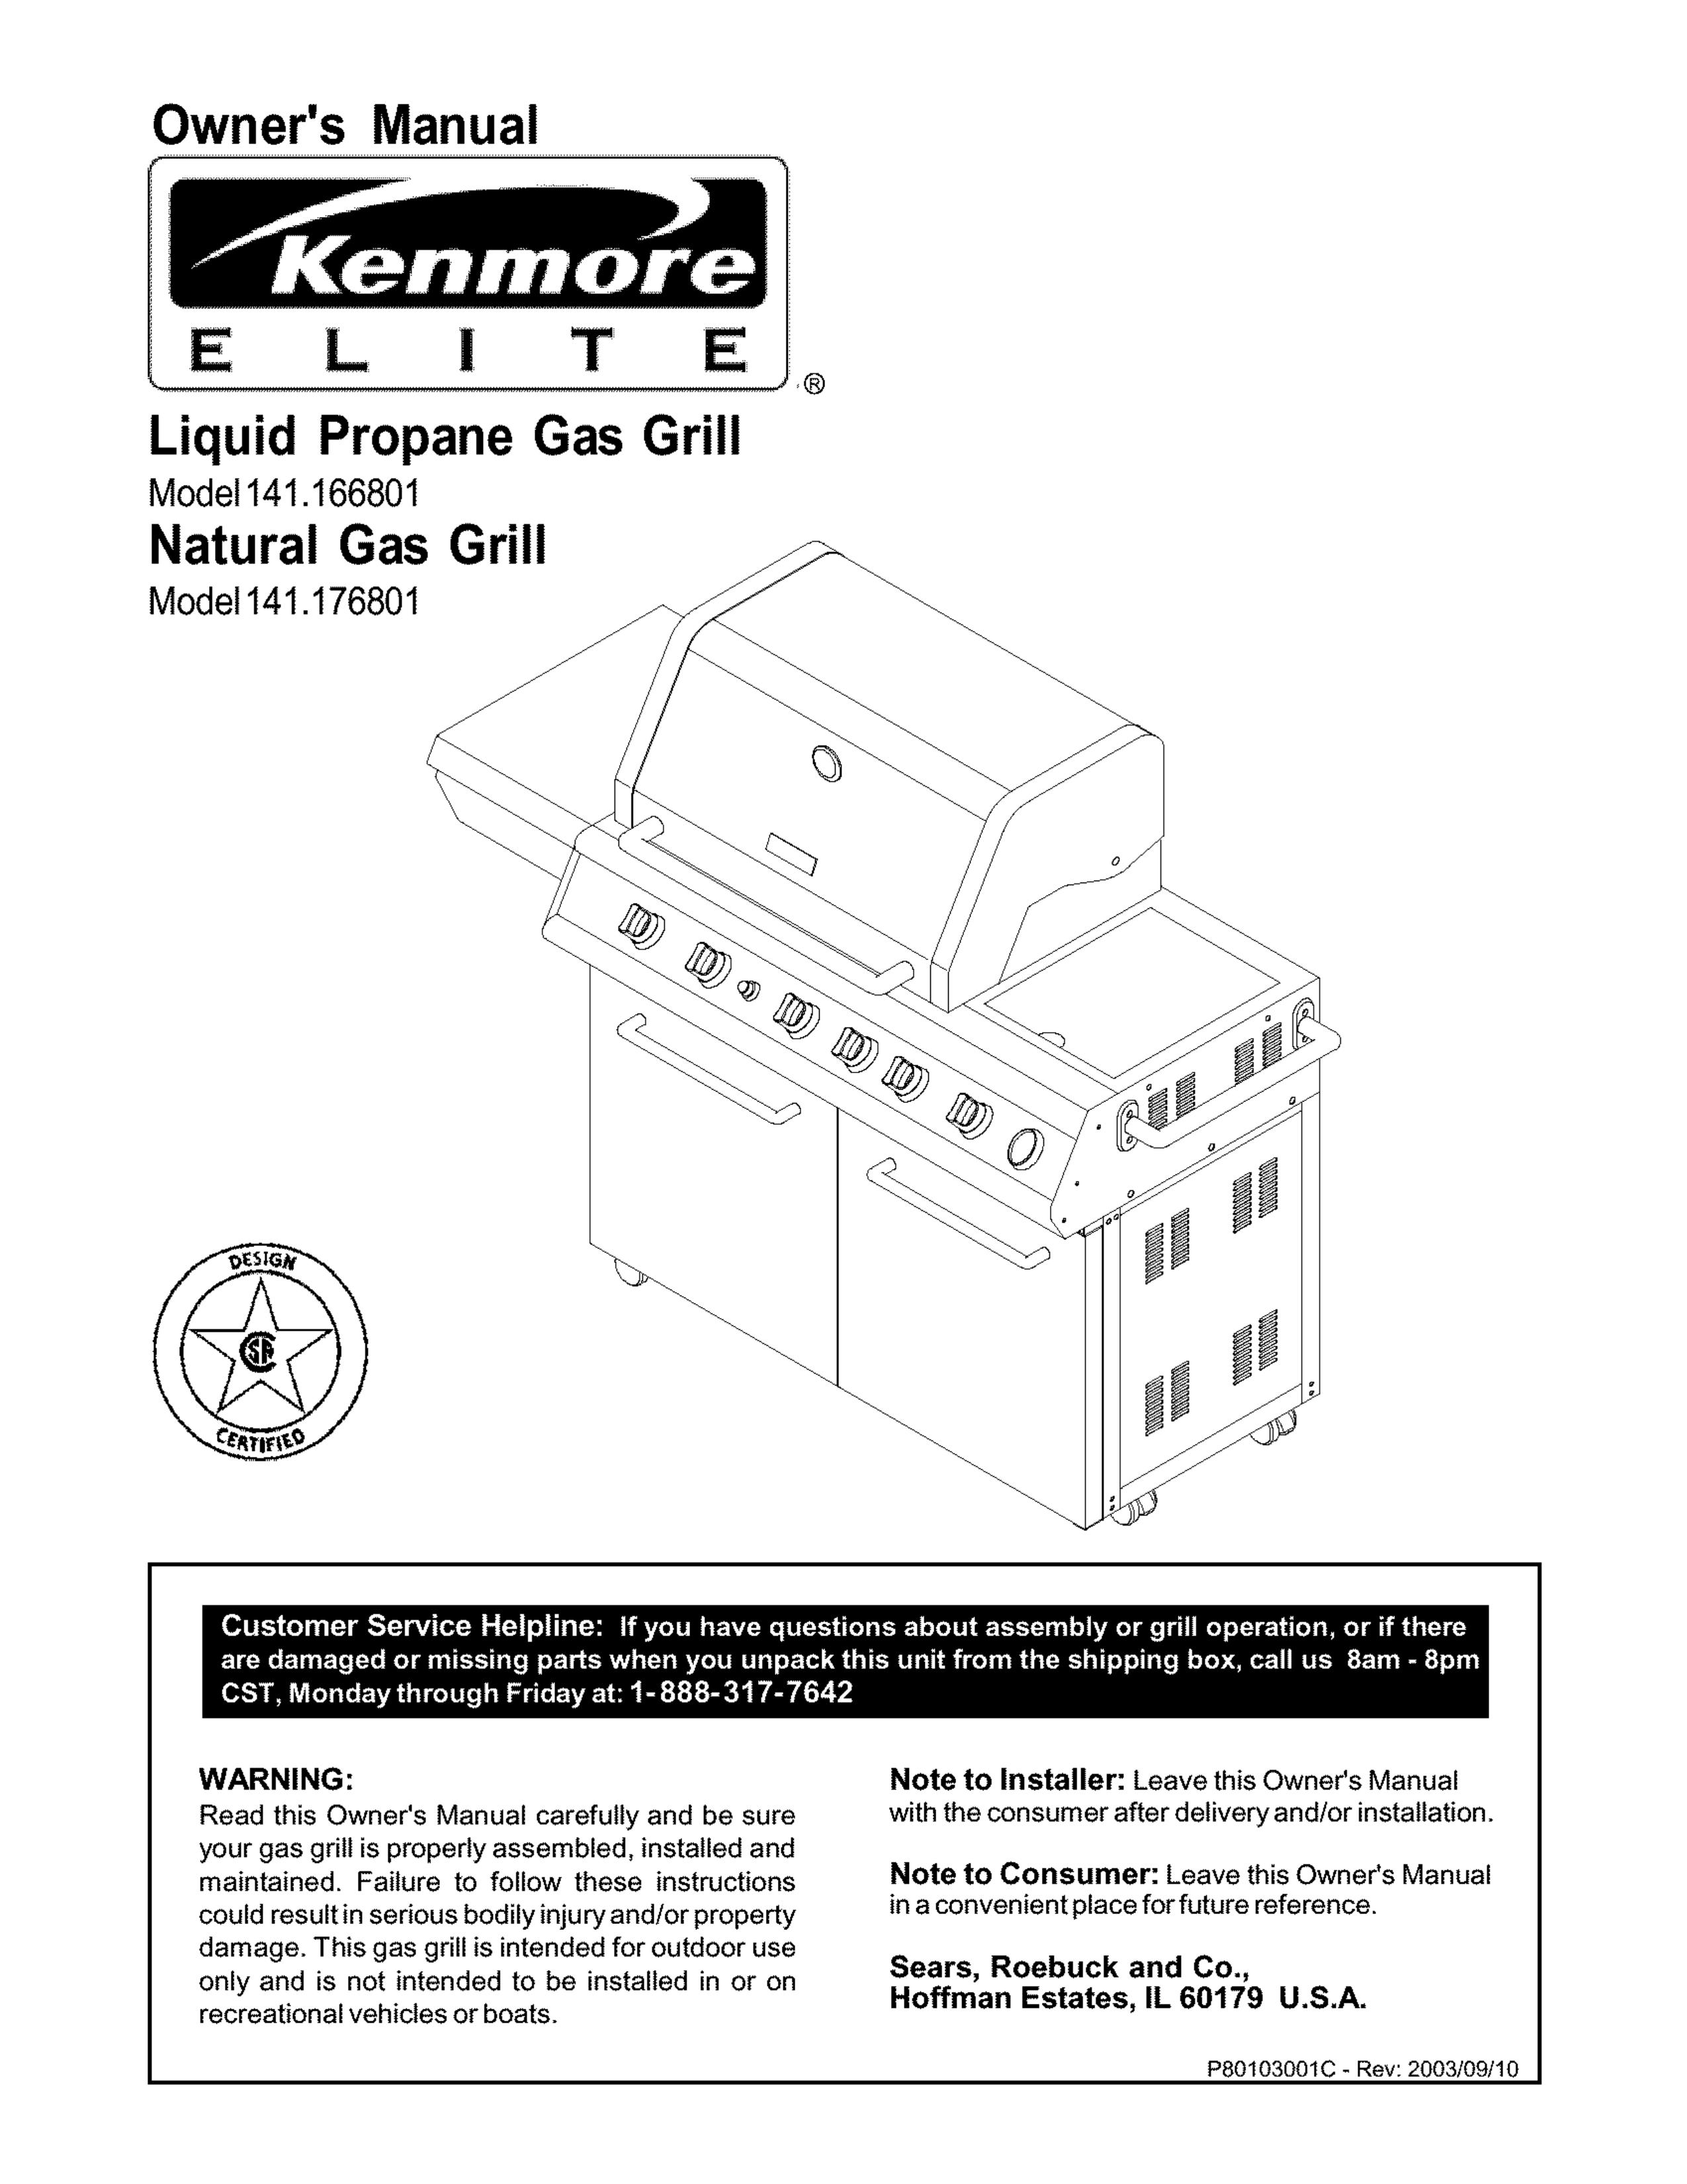 Kenmore 141.166801 Gas Grill User Manual